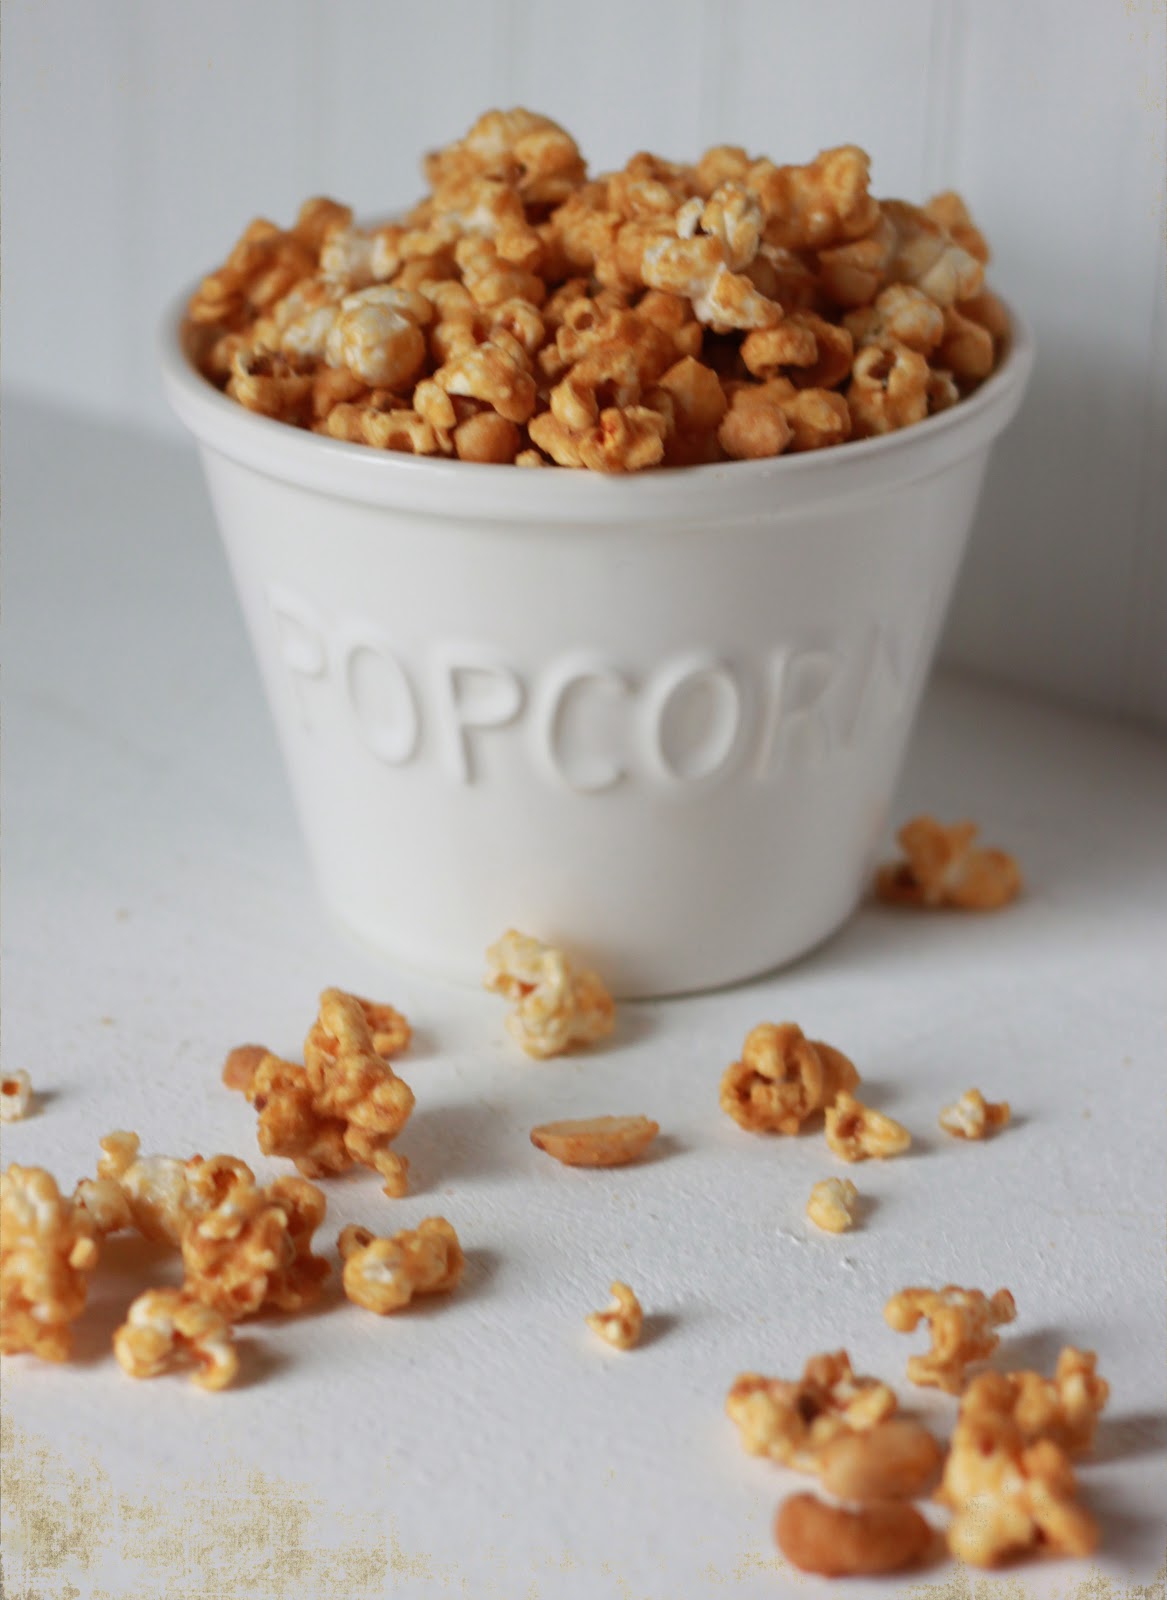 The Charm of Home: The Best Ever Caramel Popcorn